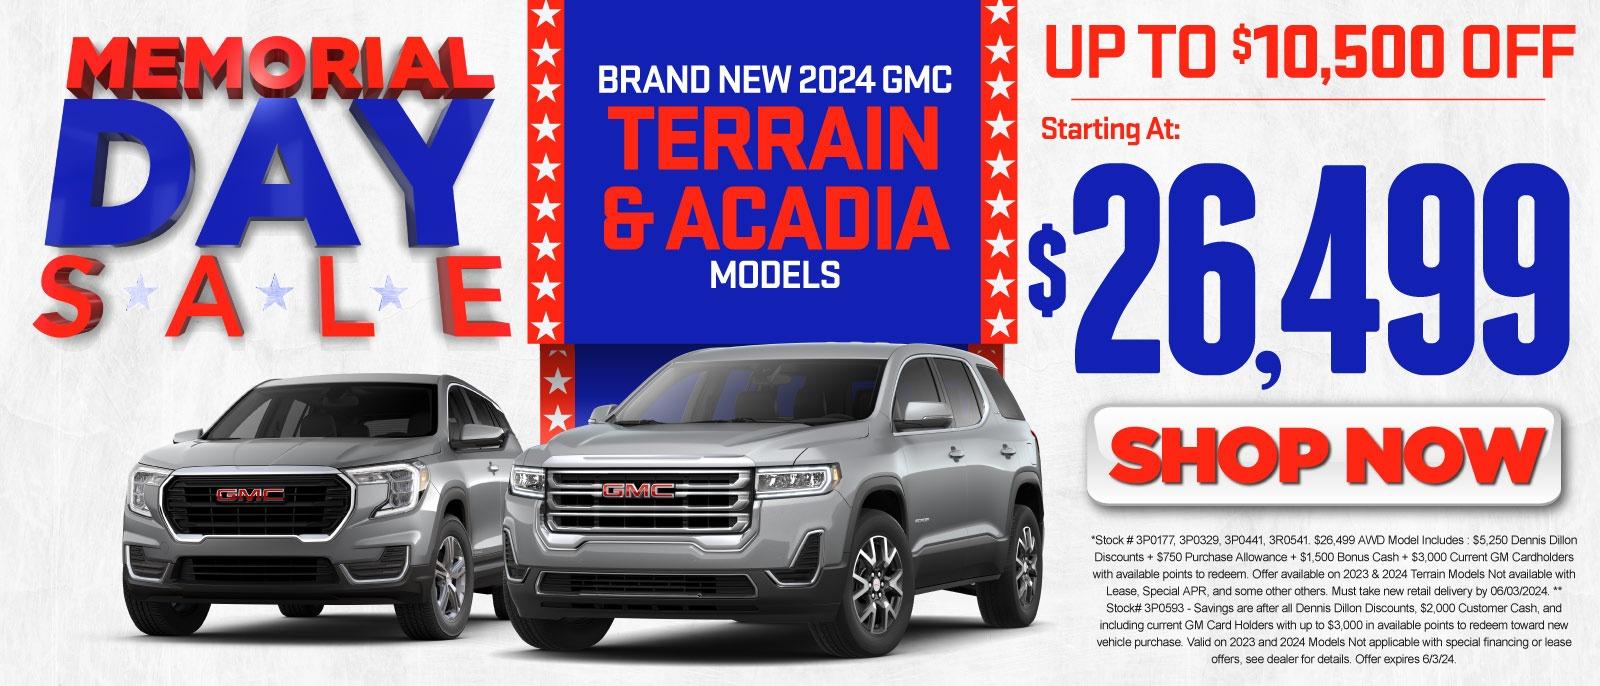 Up to $10,500 off 2024 Terrain* and Acadias** AWD Models Starting at $26,499